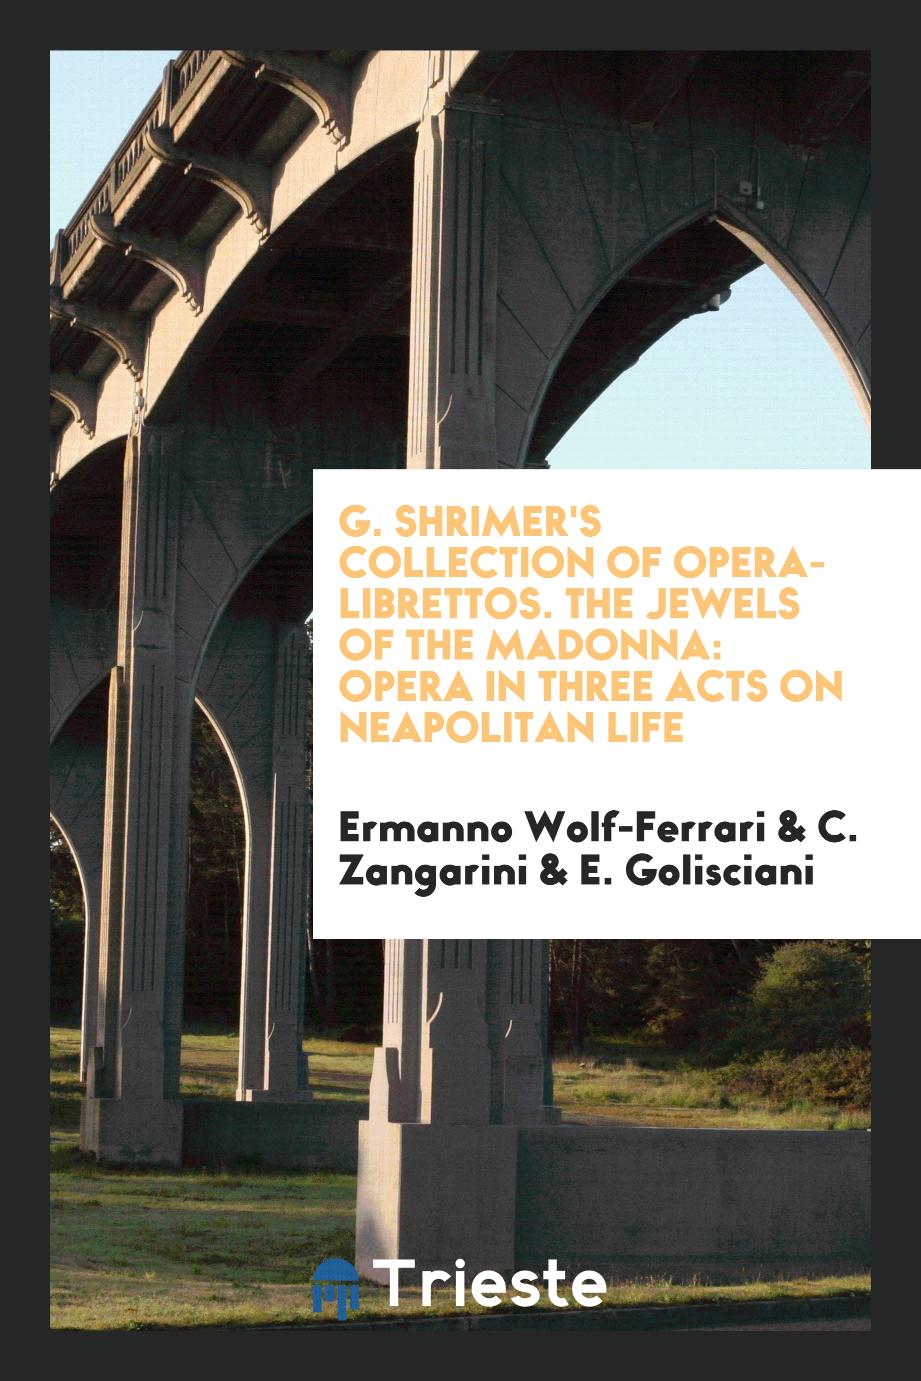 G. Shrimer's Collection of Opera-Librettos. The Jewels of the Madonna: Opera in Three Acts on Neapolitan Life